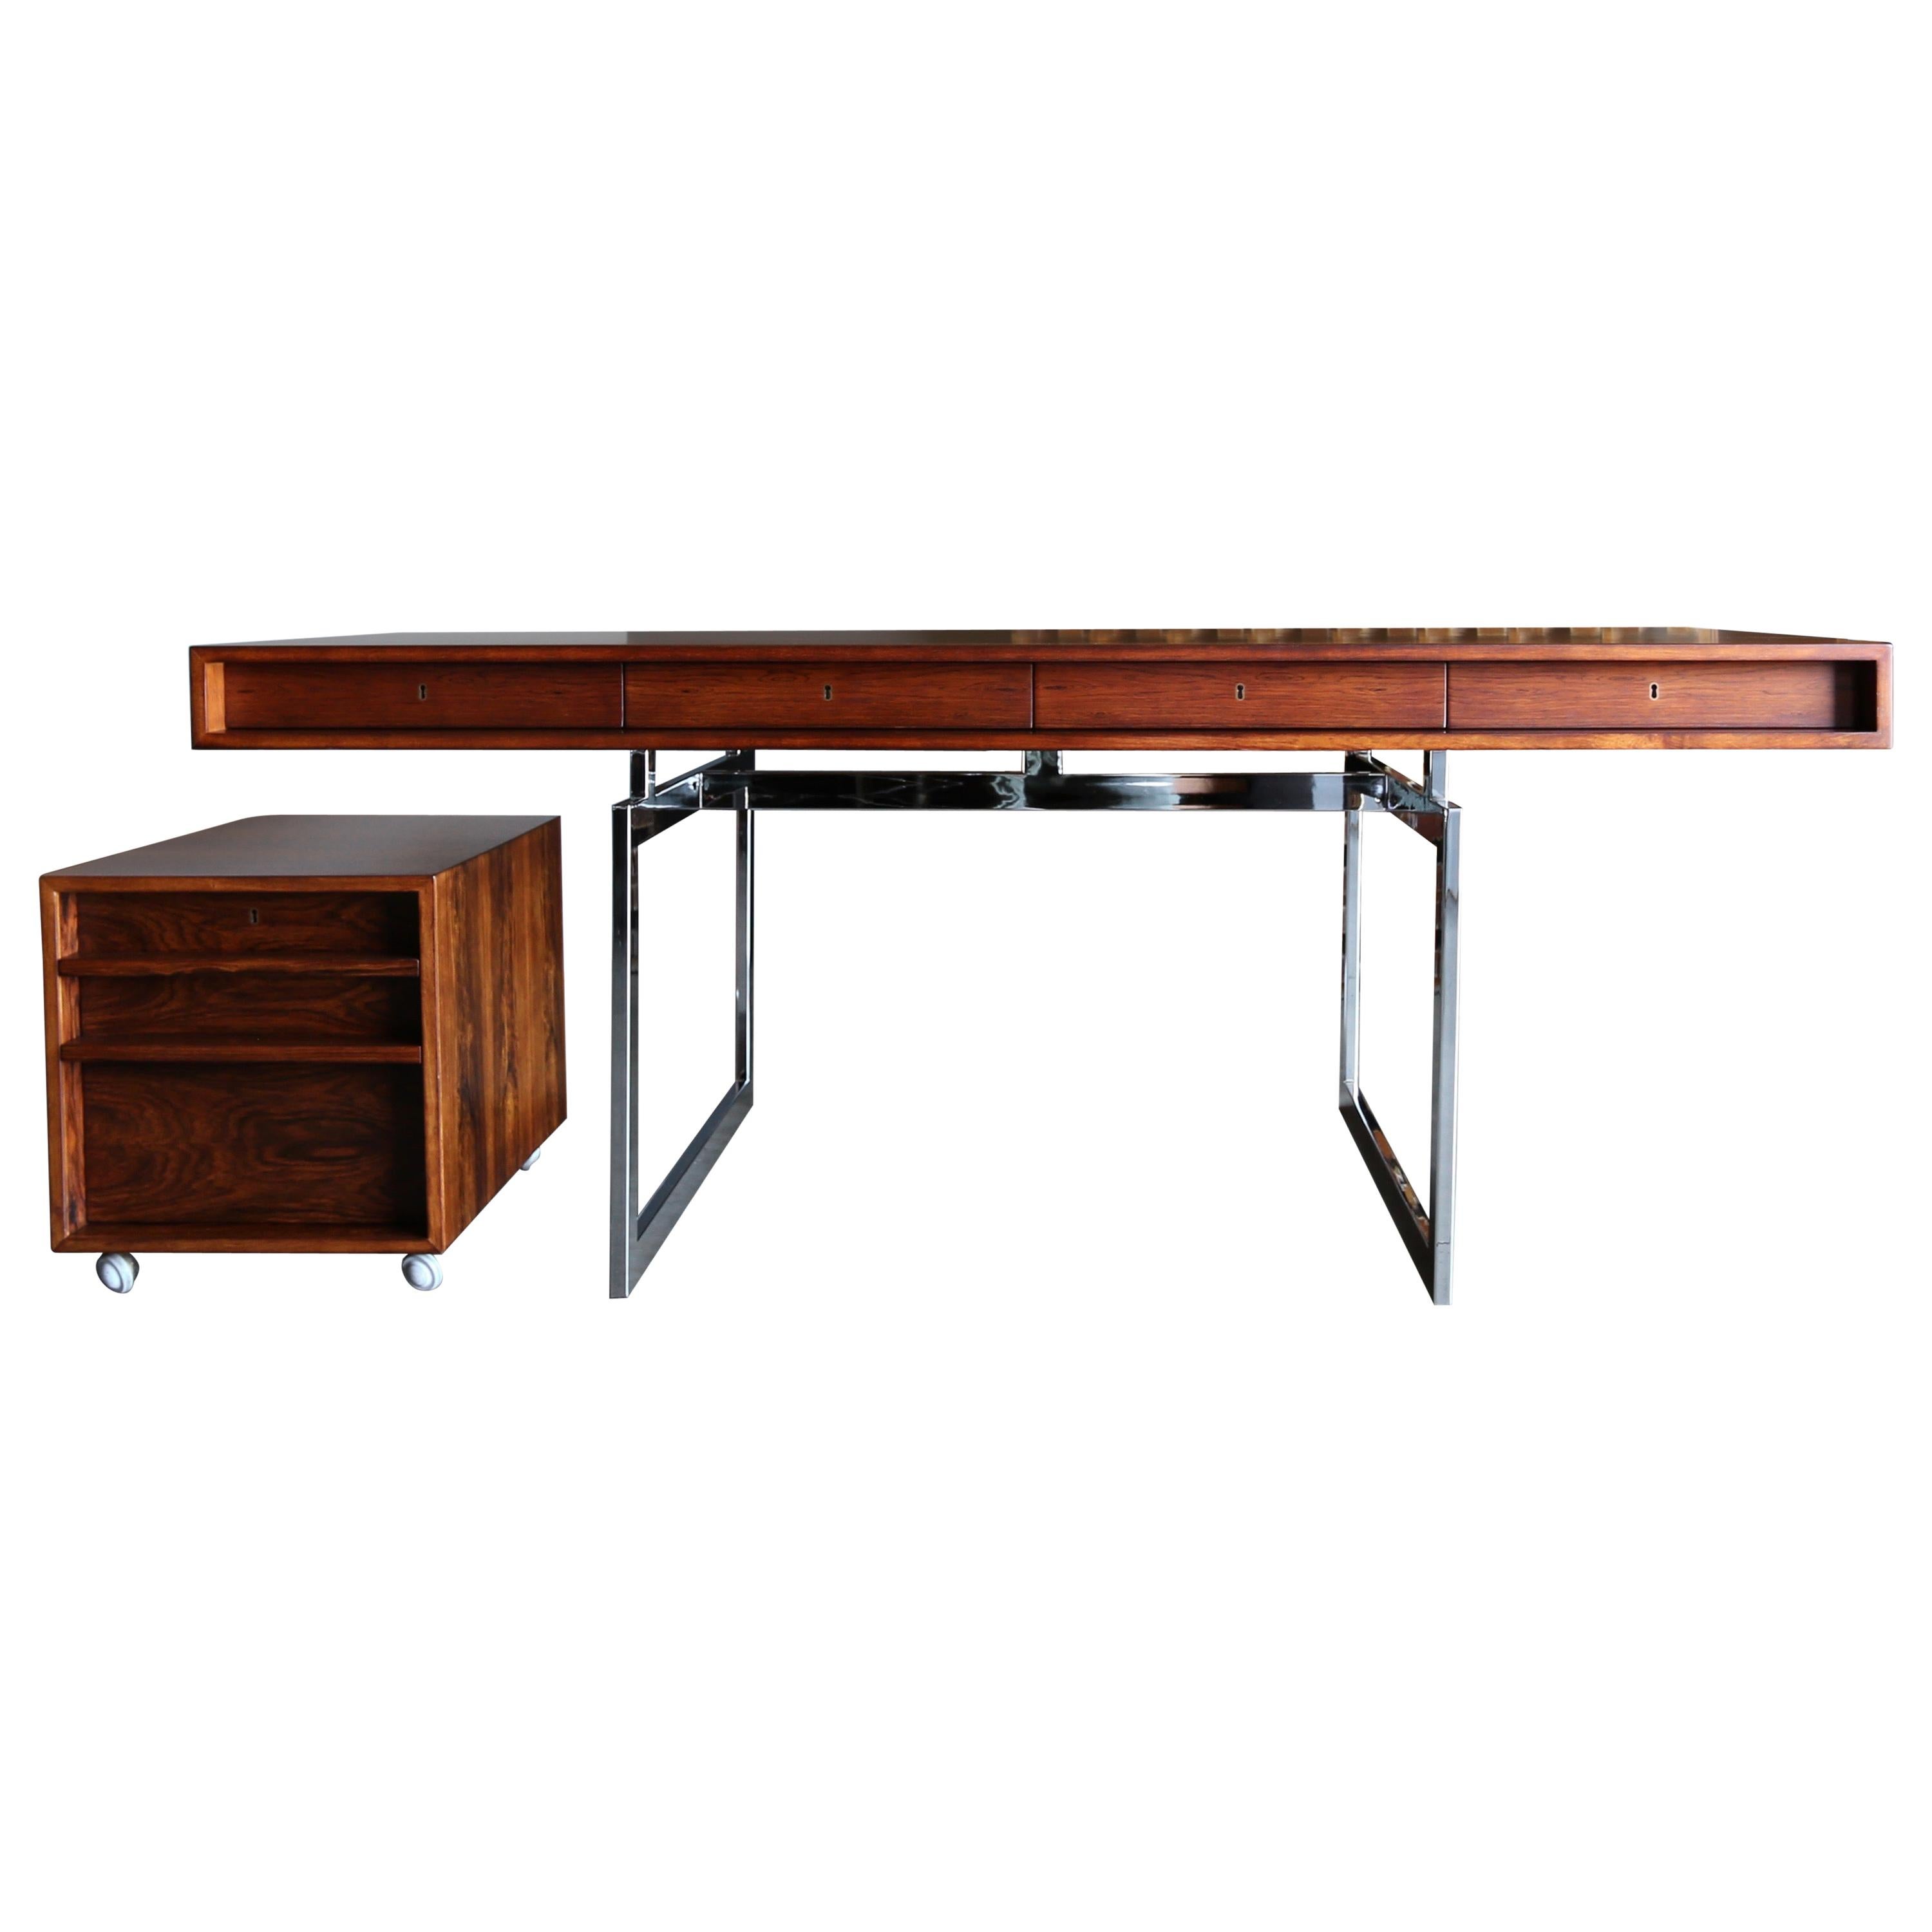 Bodil Kjaer Rosewood Desk for E. Pederson and Sons A/S, circa 1959